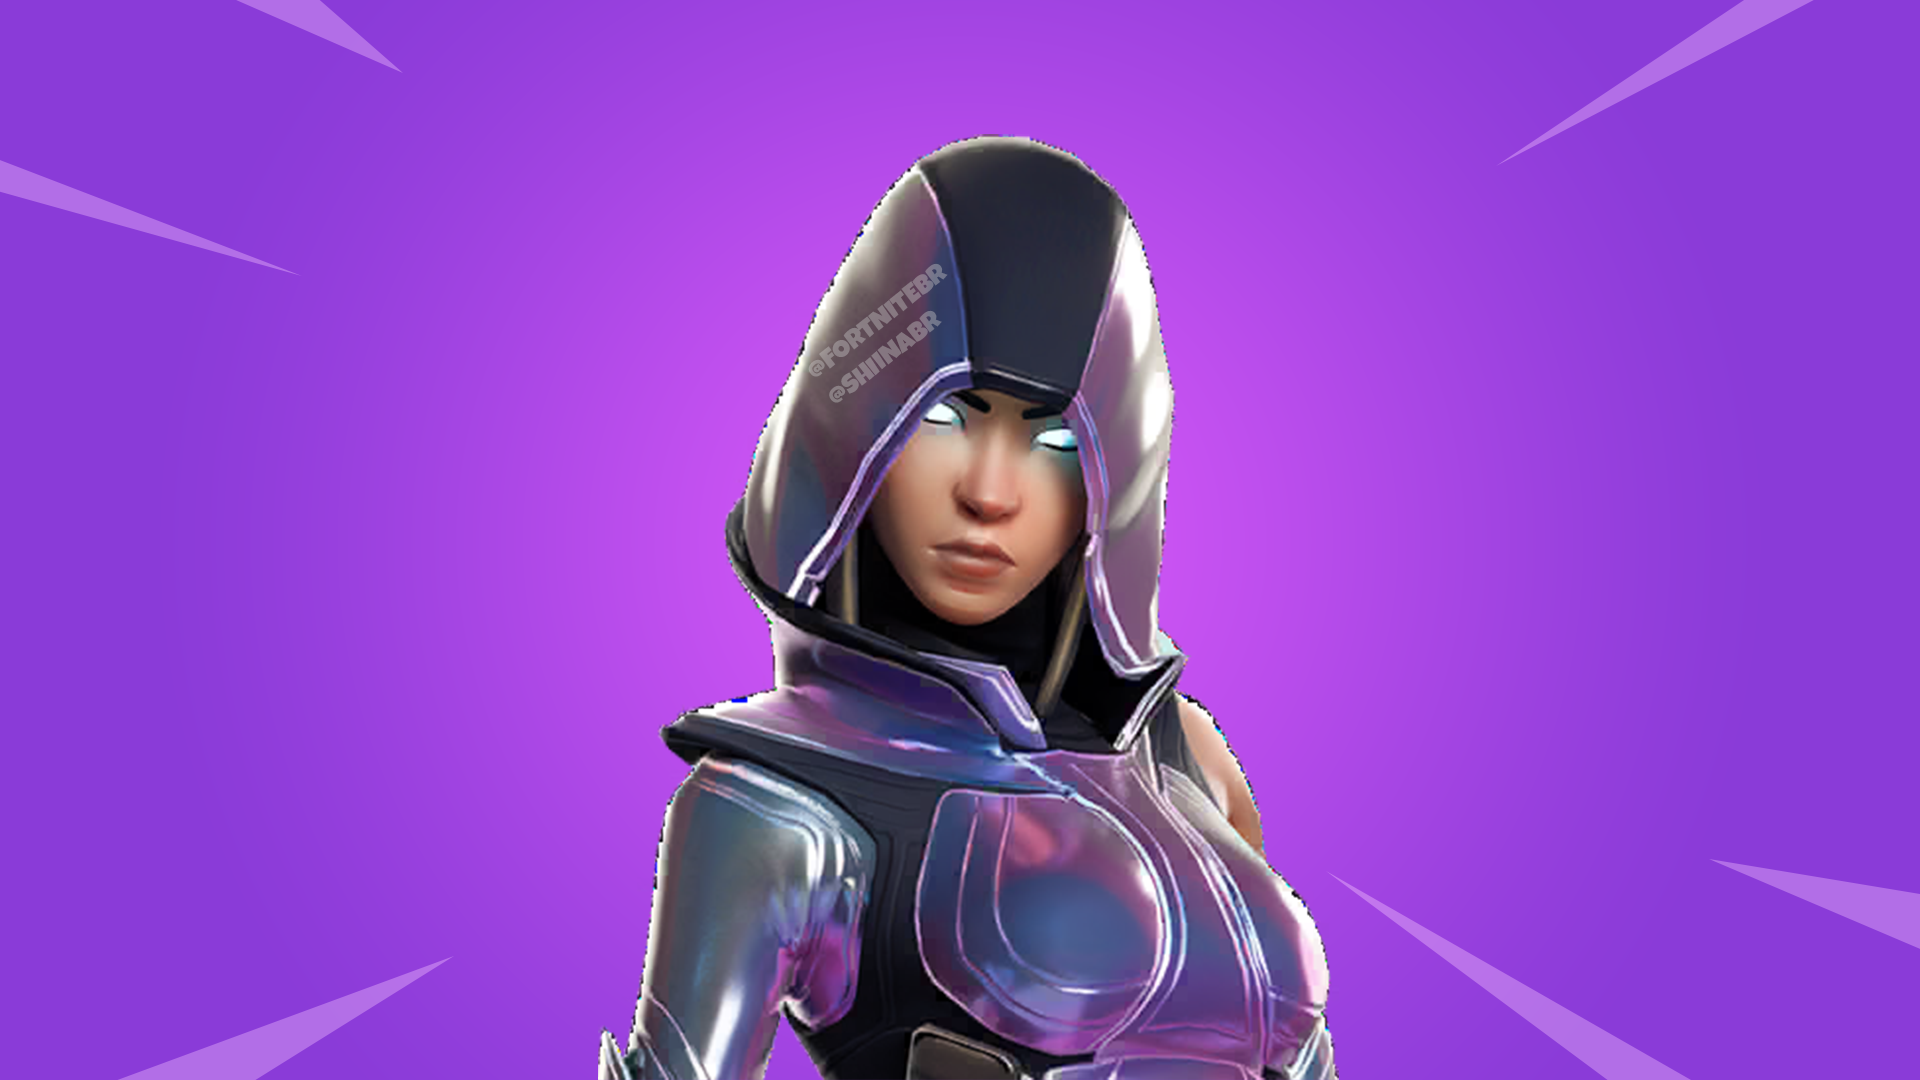 Can You Still Get The Glow Skin In Fortnite Chapter 2 Season 3 Fortnite Samsung Galaxy Note 10 S10 Exclusive Glow Skin Leaked Fortnite News